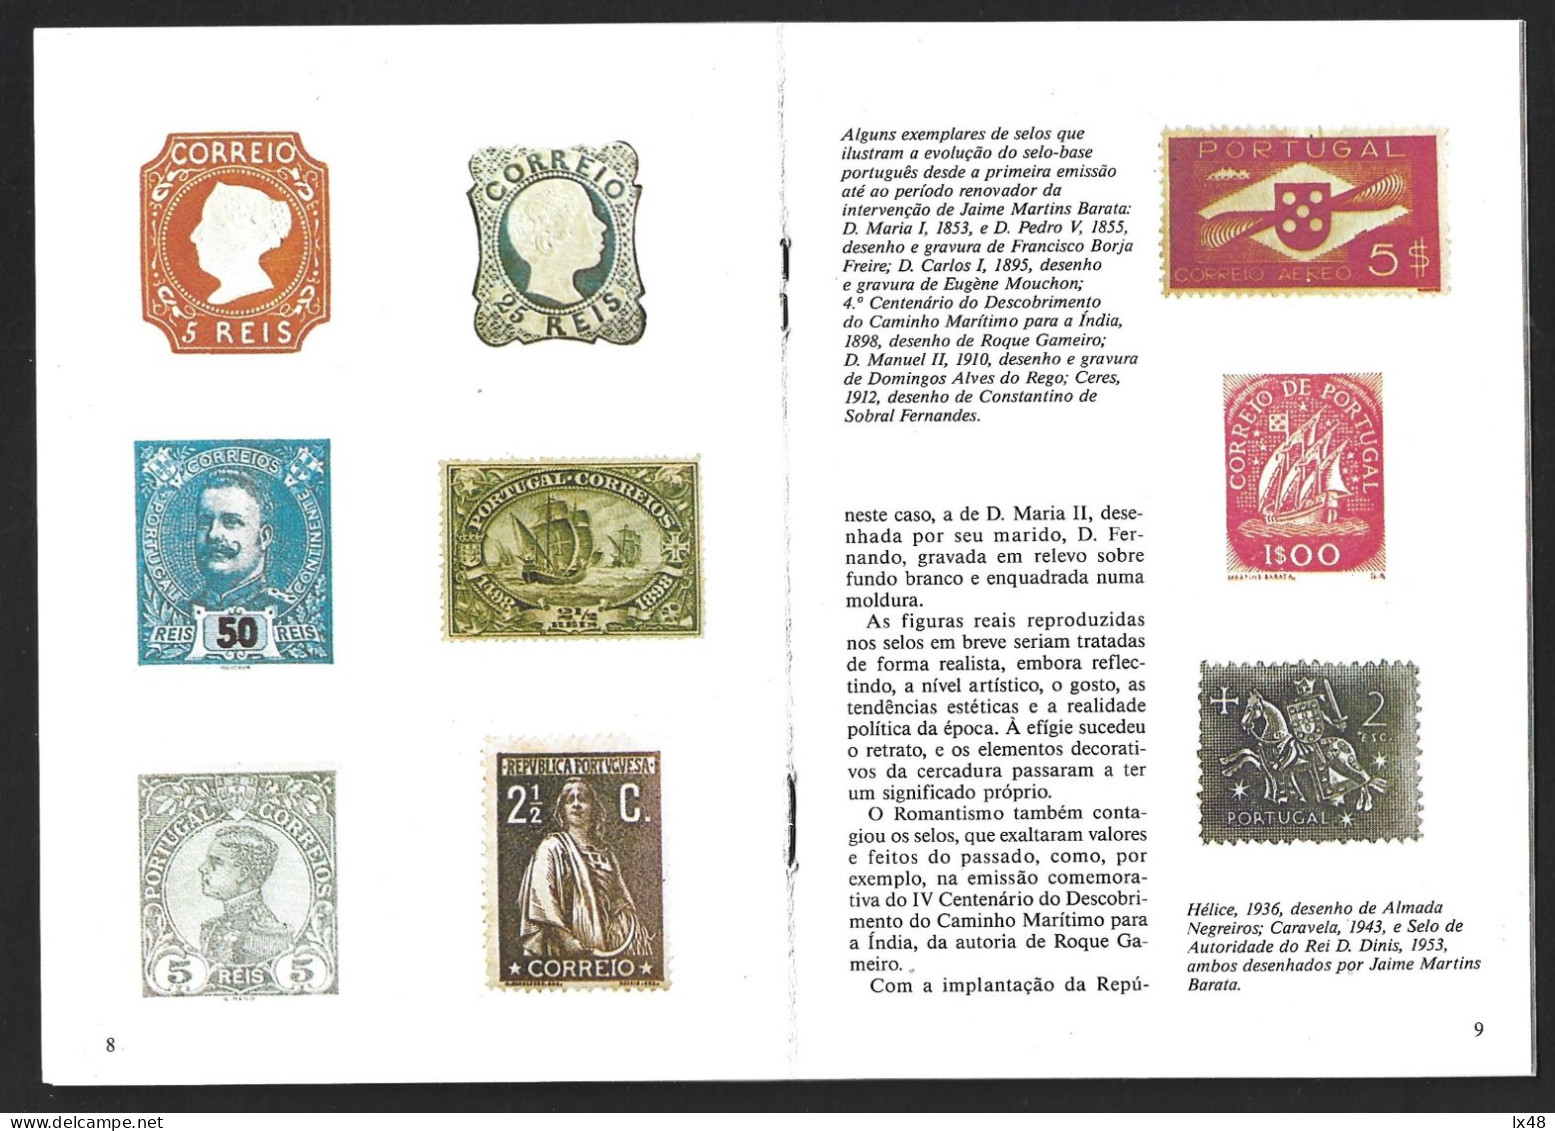 Pocket Book (15x11cm) 'The Portuguese Postage Stamp' With 20 Pages Published 1986. Livro De Bolso 'O Selo Postal Portugu - Old Books